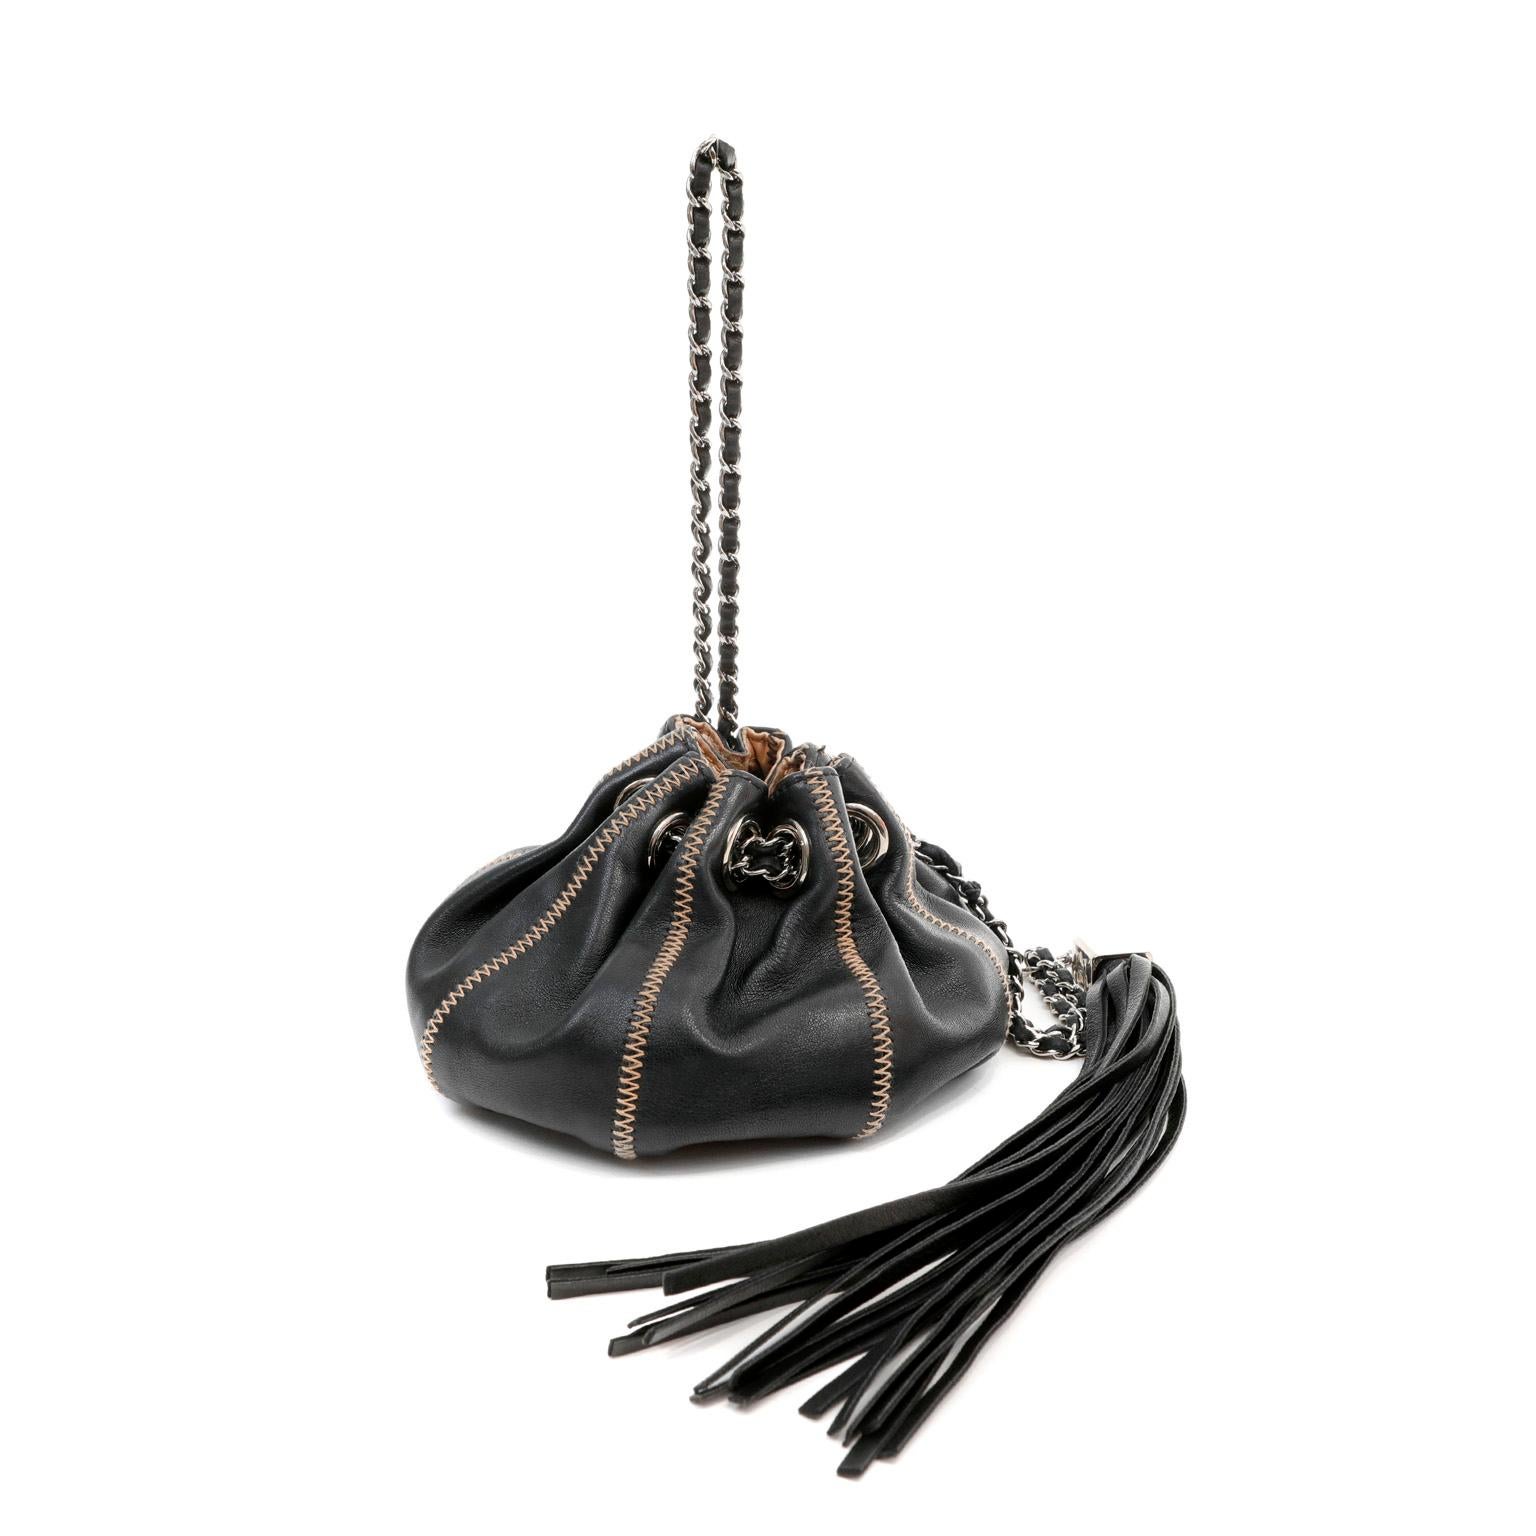 This authentic Chanel Black Leather Reversible Pouchette is in beautiful condition.  A feminine petite bag for evening, this versatile reticule may be reversed to the satin beige side. Black leather drawstring style pouch has contrasting zig zag